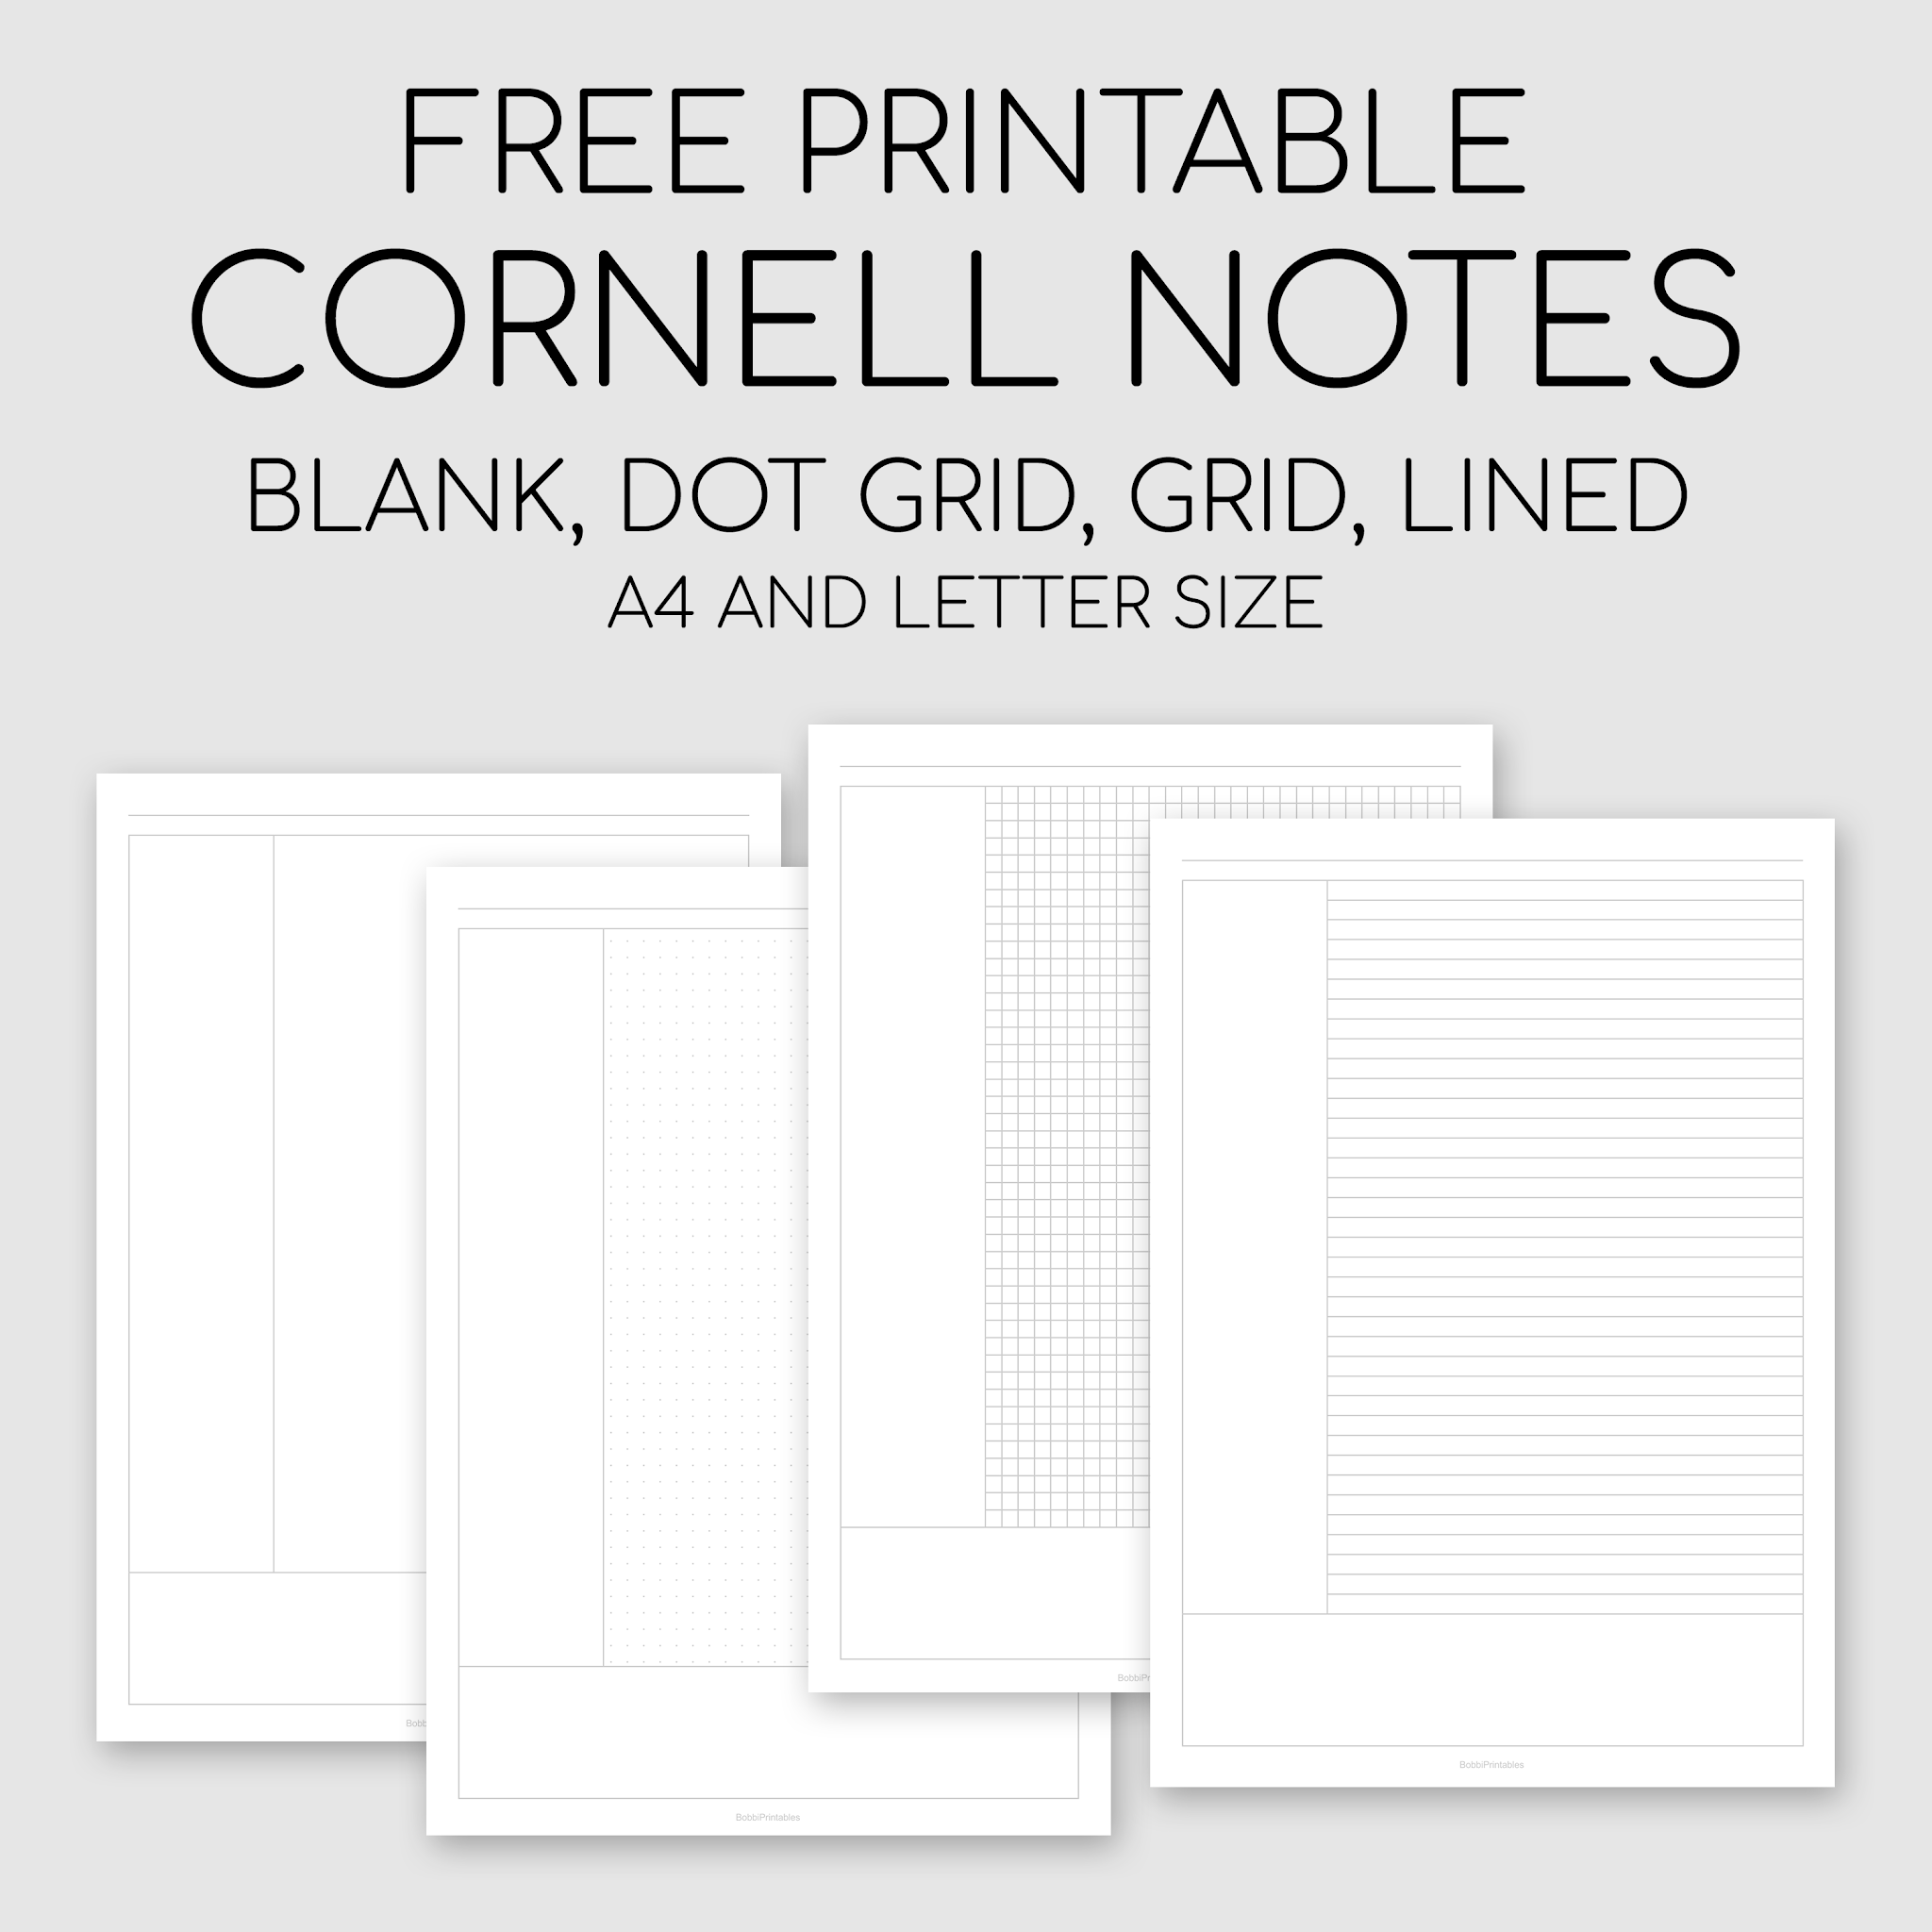 download-printable-cornell-notes-template-blue-background-pdf